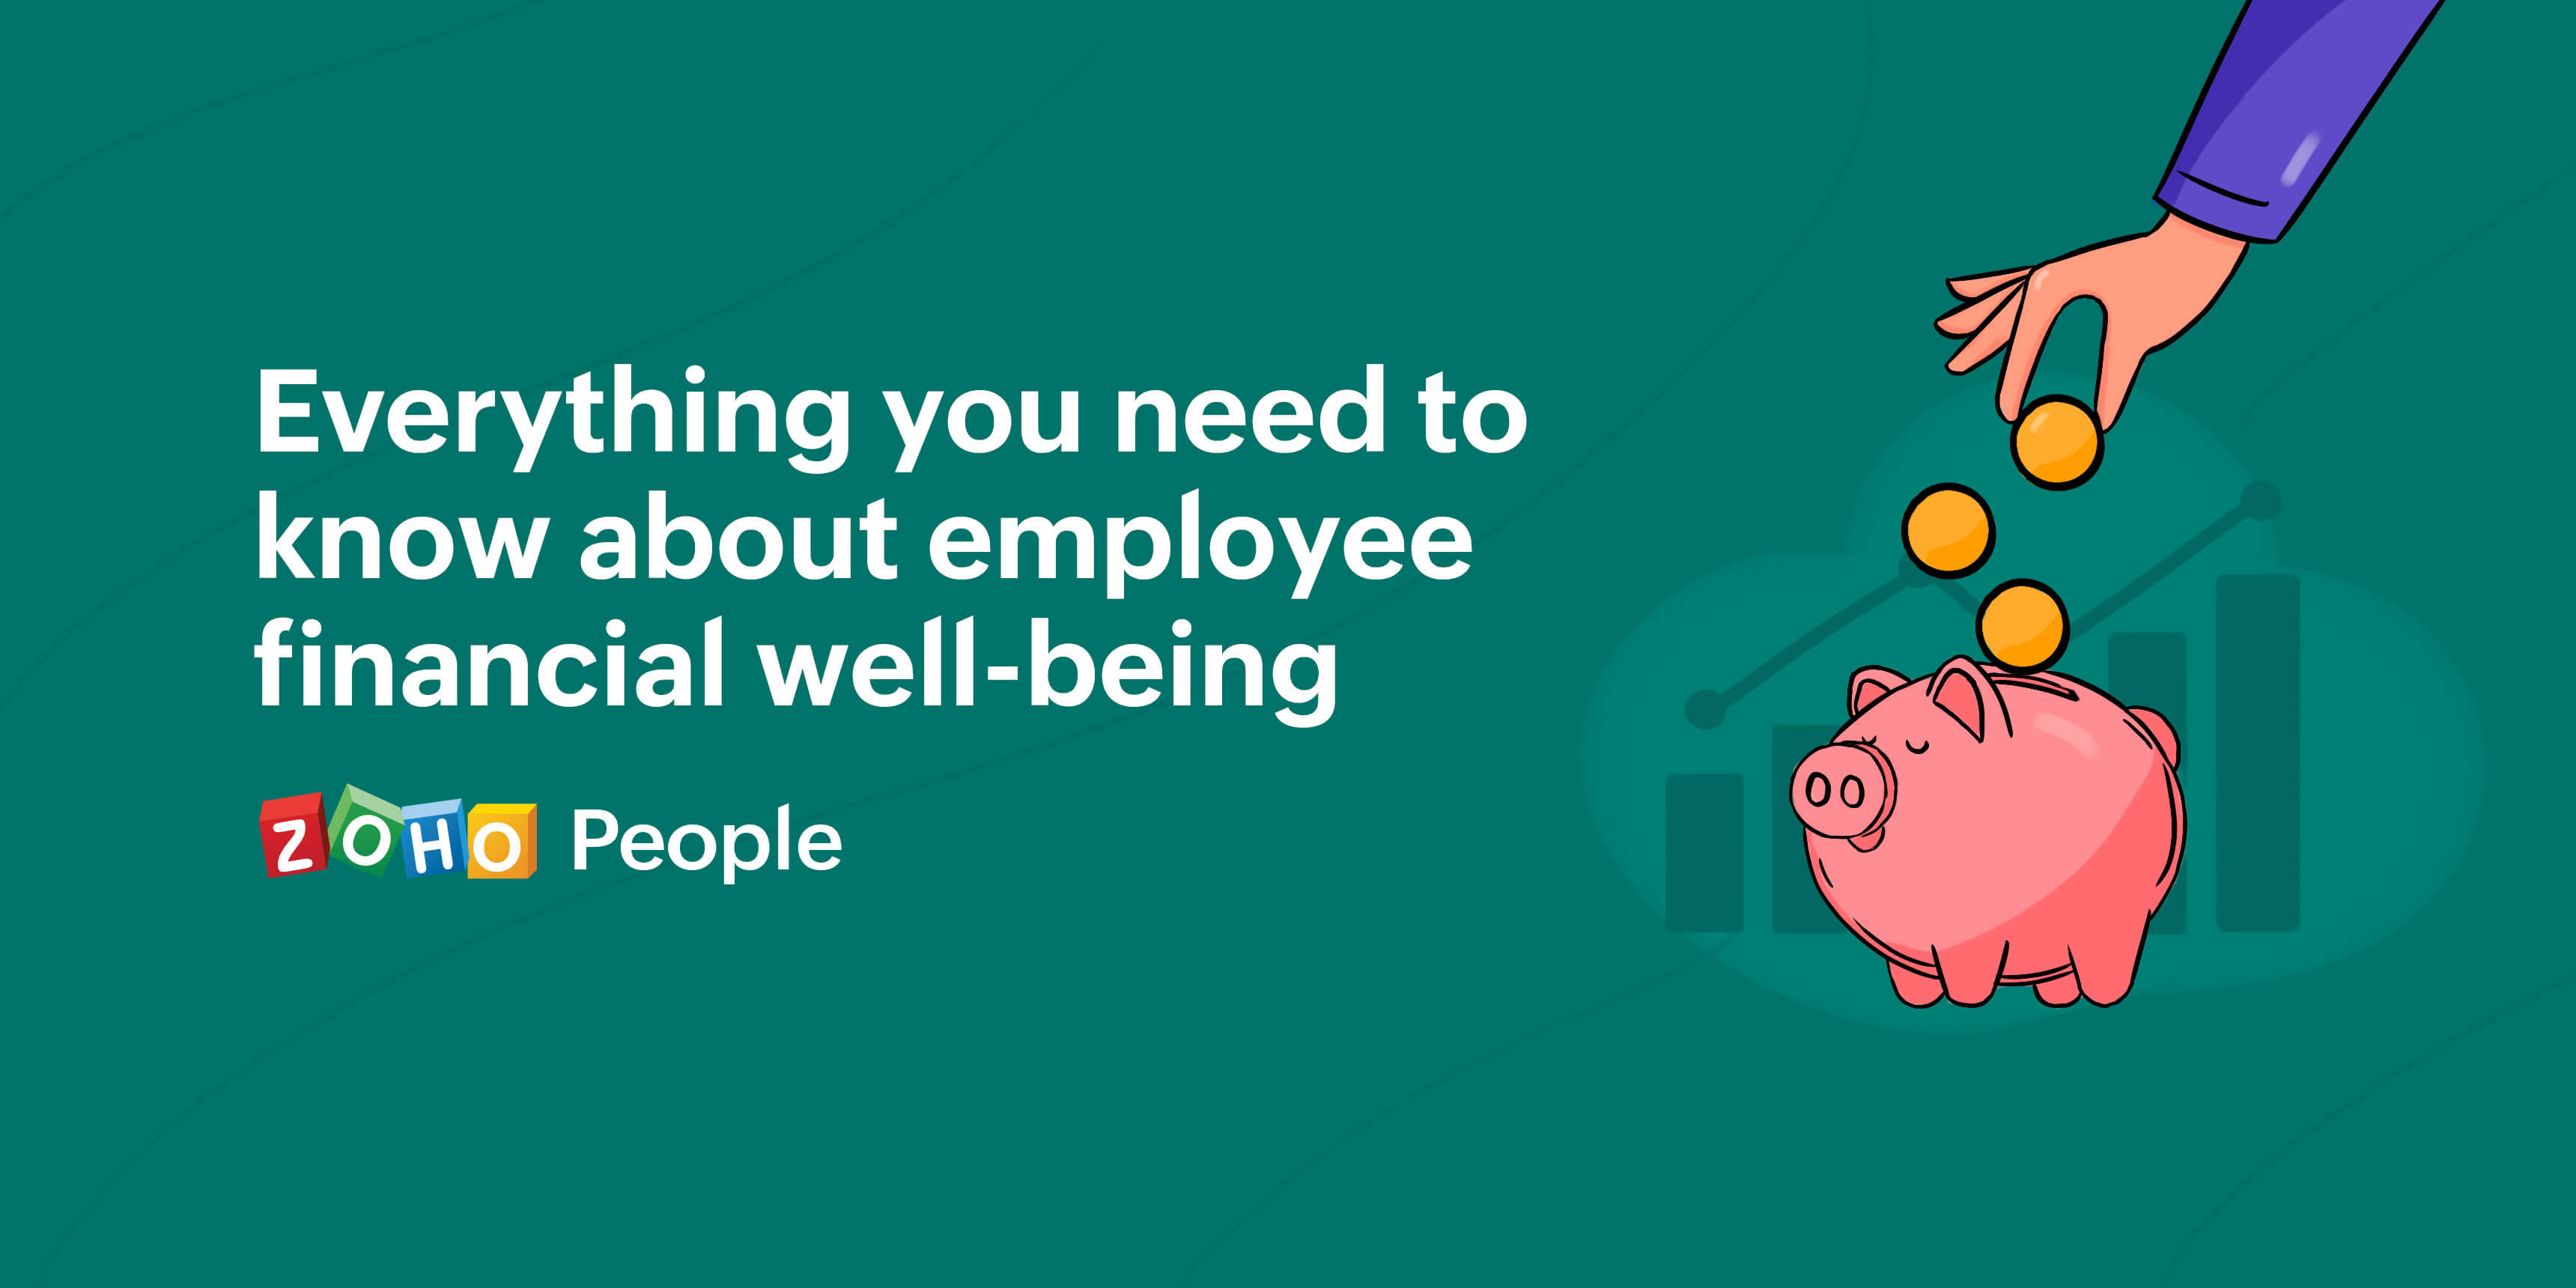 Everything you need to know about employee financial well-being